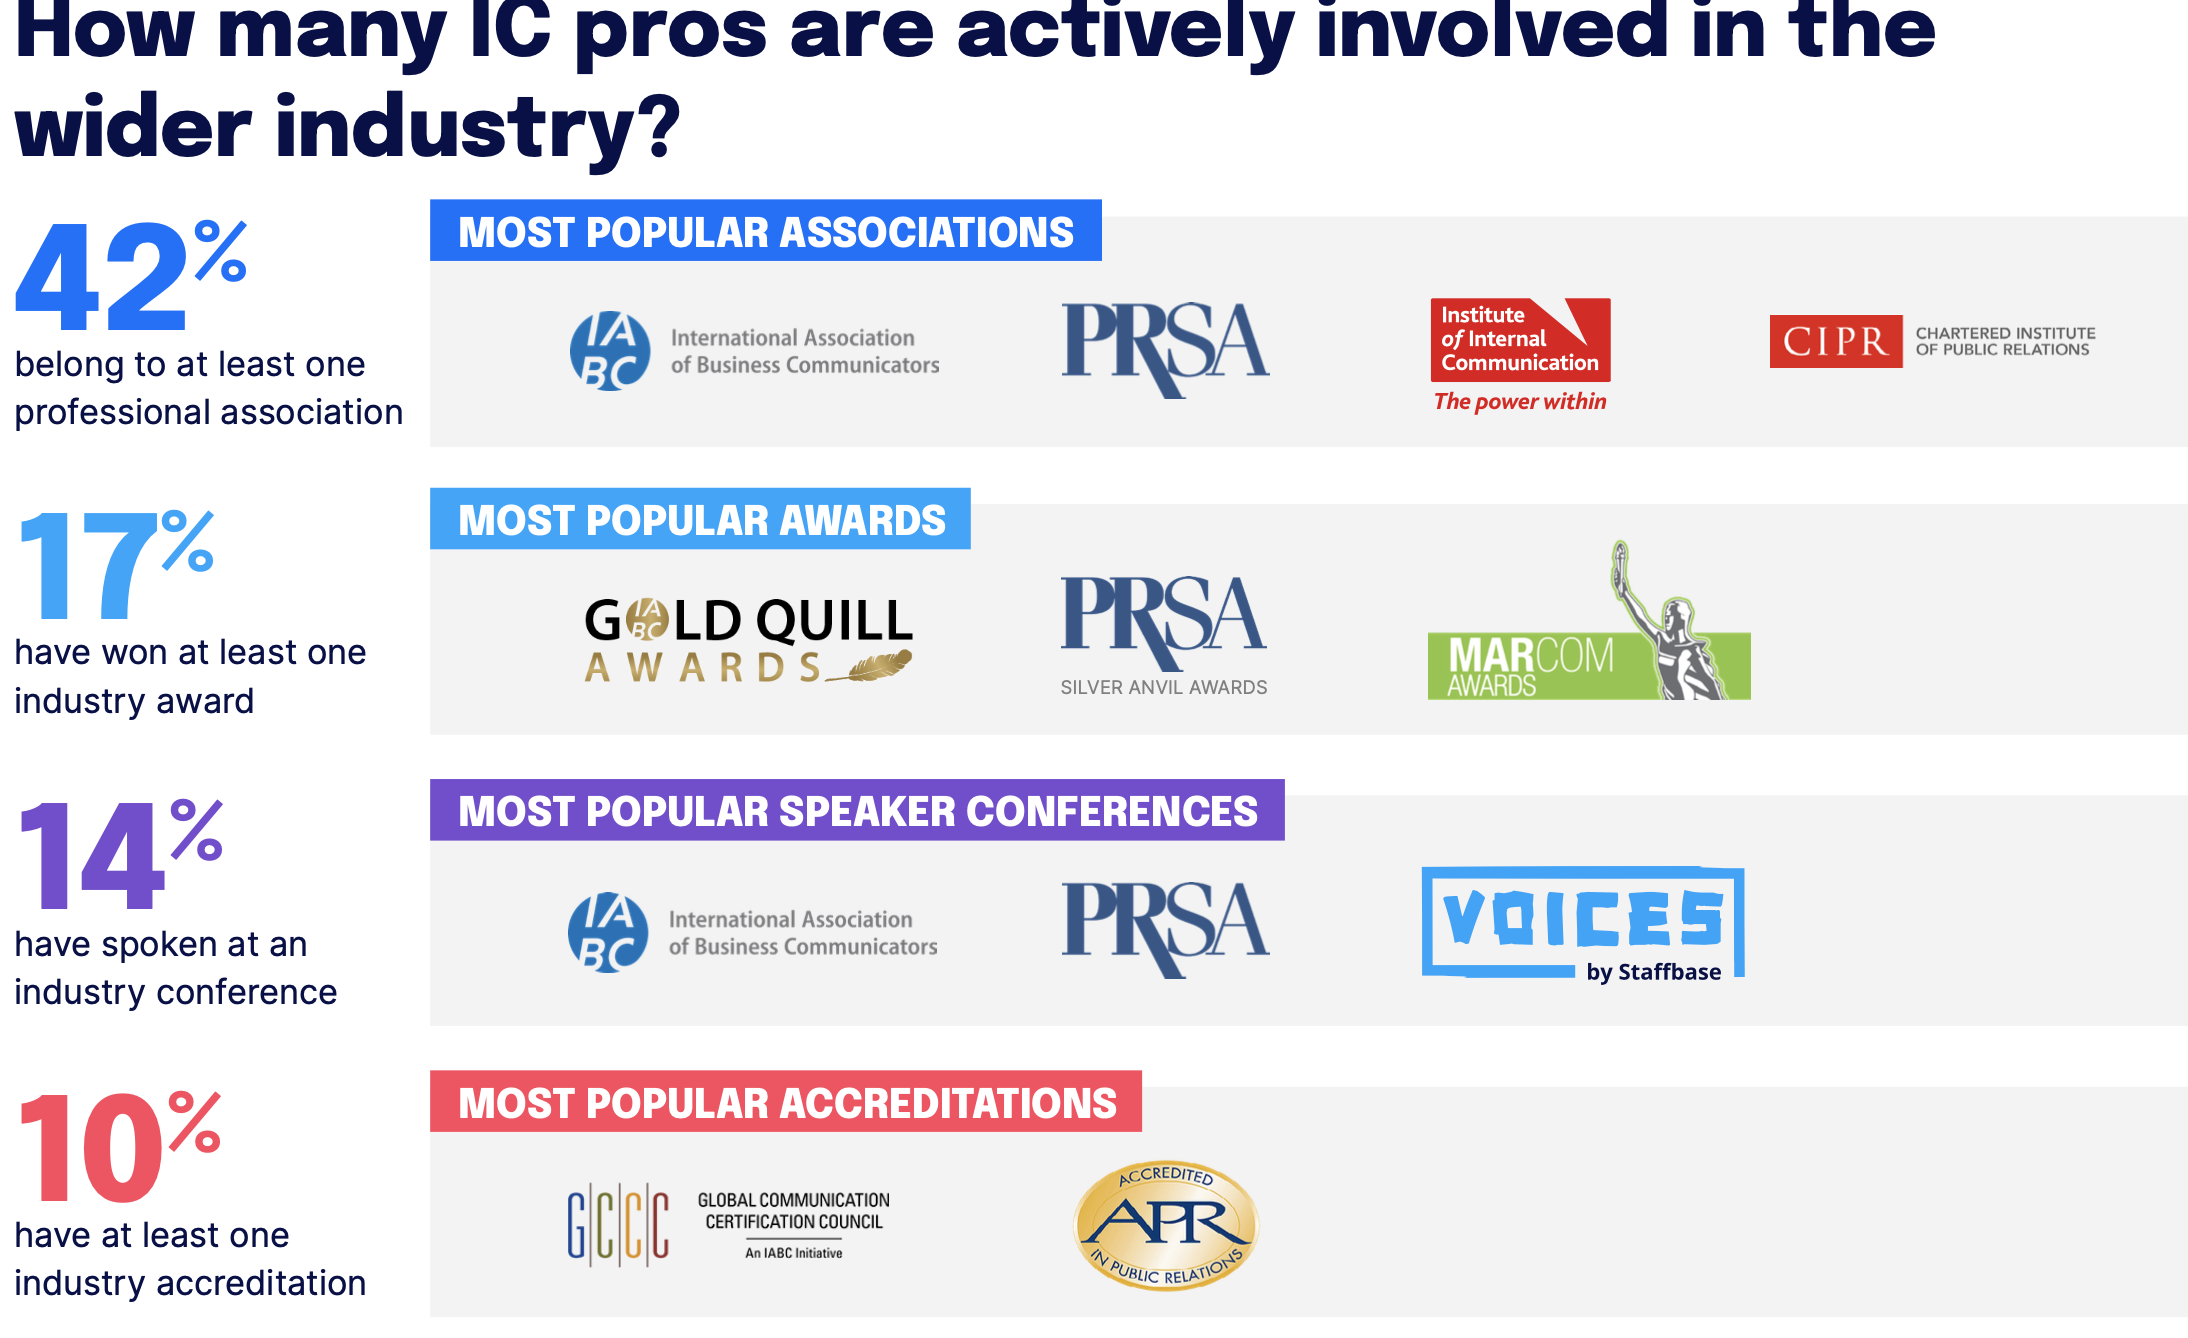 An infographic from the 2022 Salary Report showing that the most popular associations are IABC, PRSA, the Institute of Internal Communication, and CIPR.